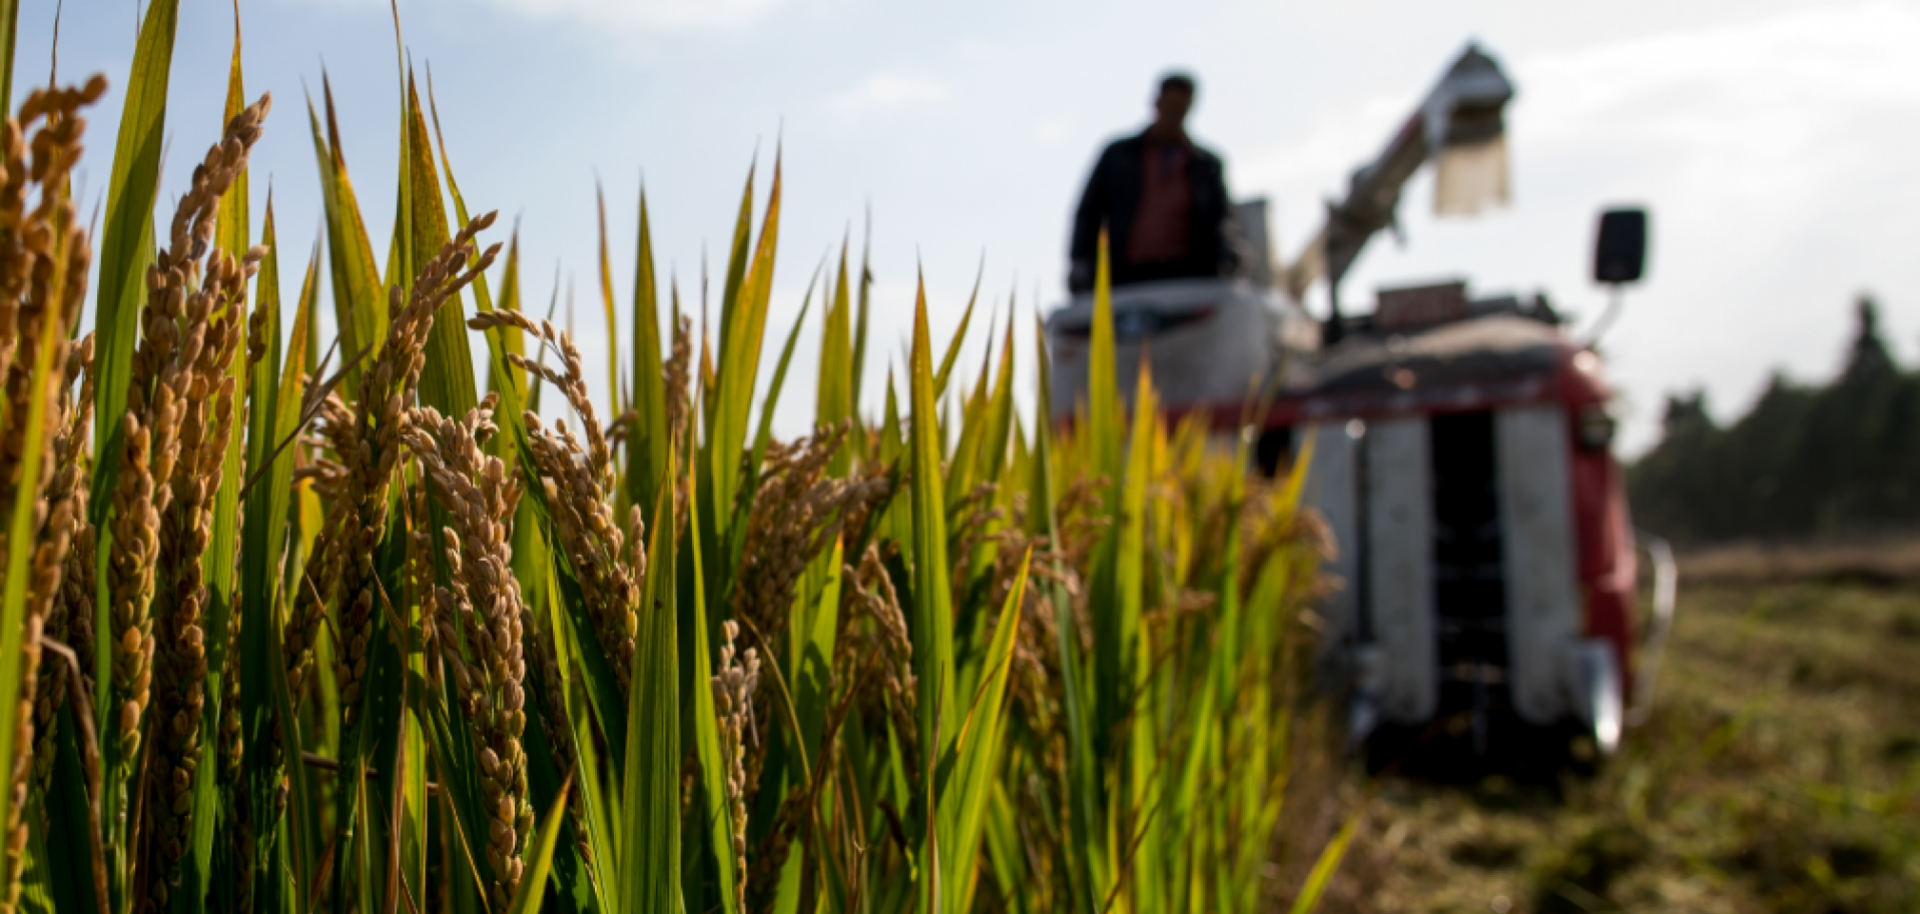 Global rice exports are currently concentrated among a handful of producers.